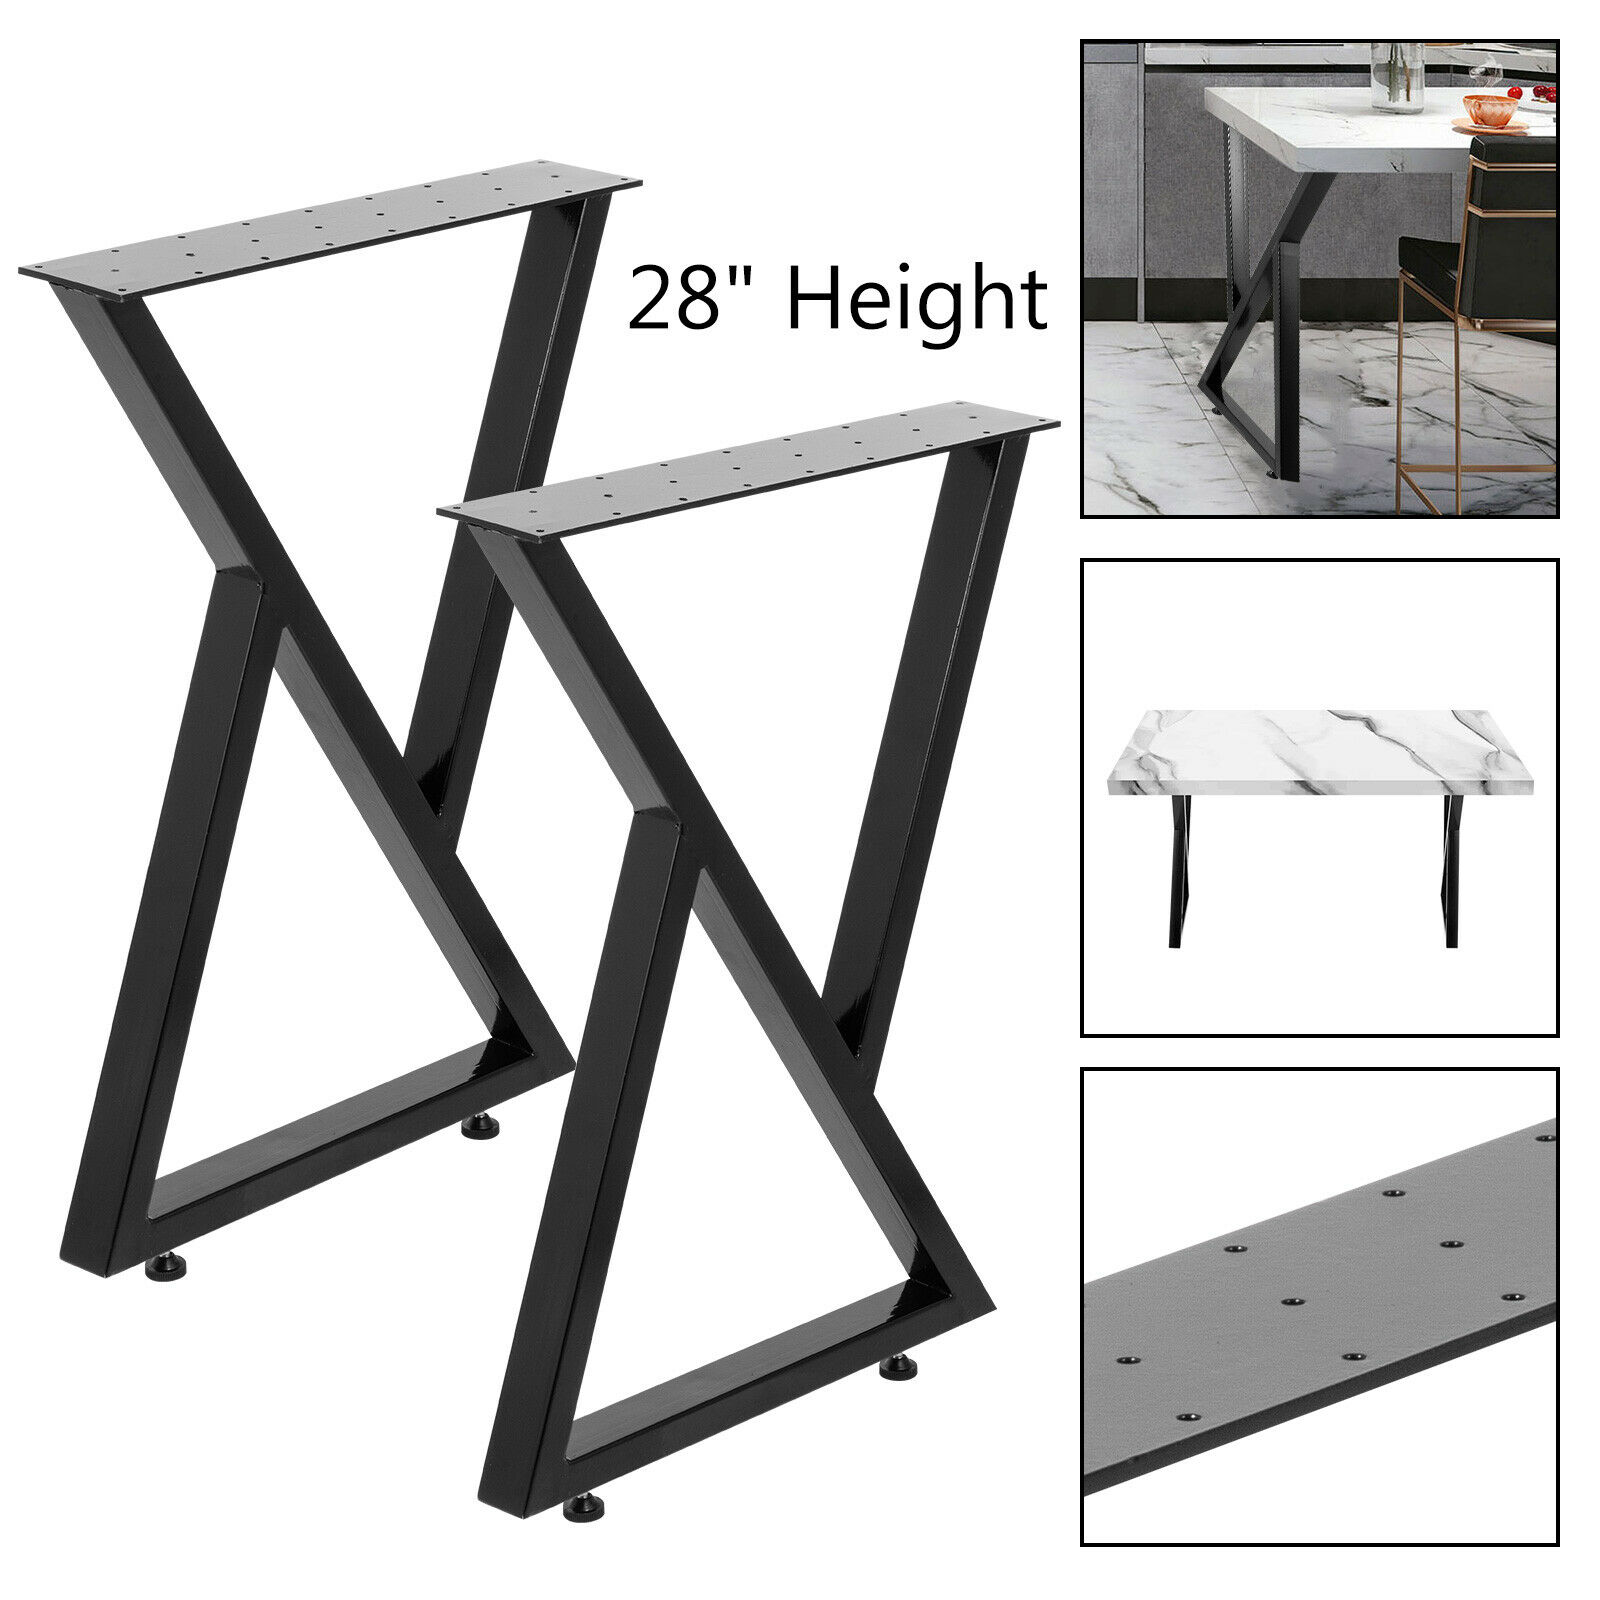 Office Table Legs,Computer Desk Legs,Industrial kitchen table legs,Black Black Steel table legs 2 x High Quality 28 Dining Table Legs